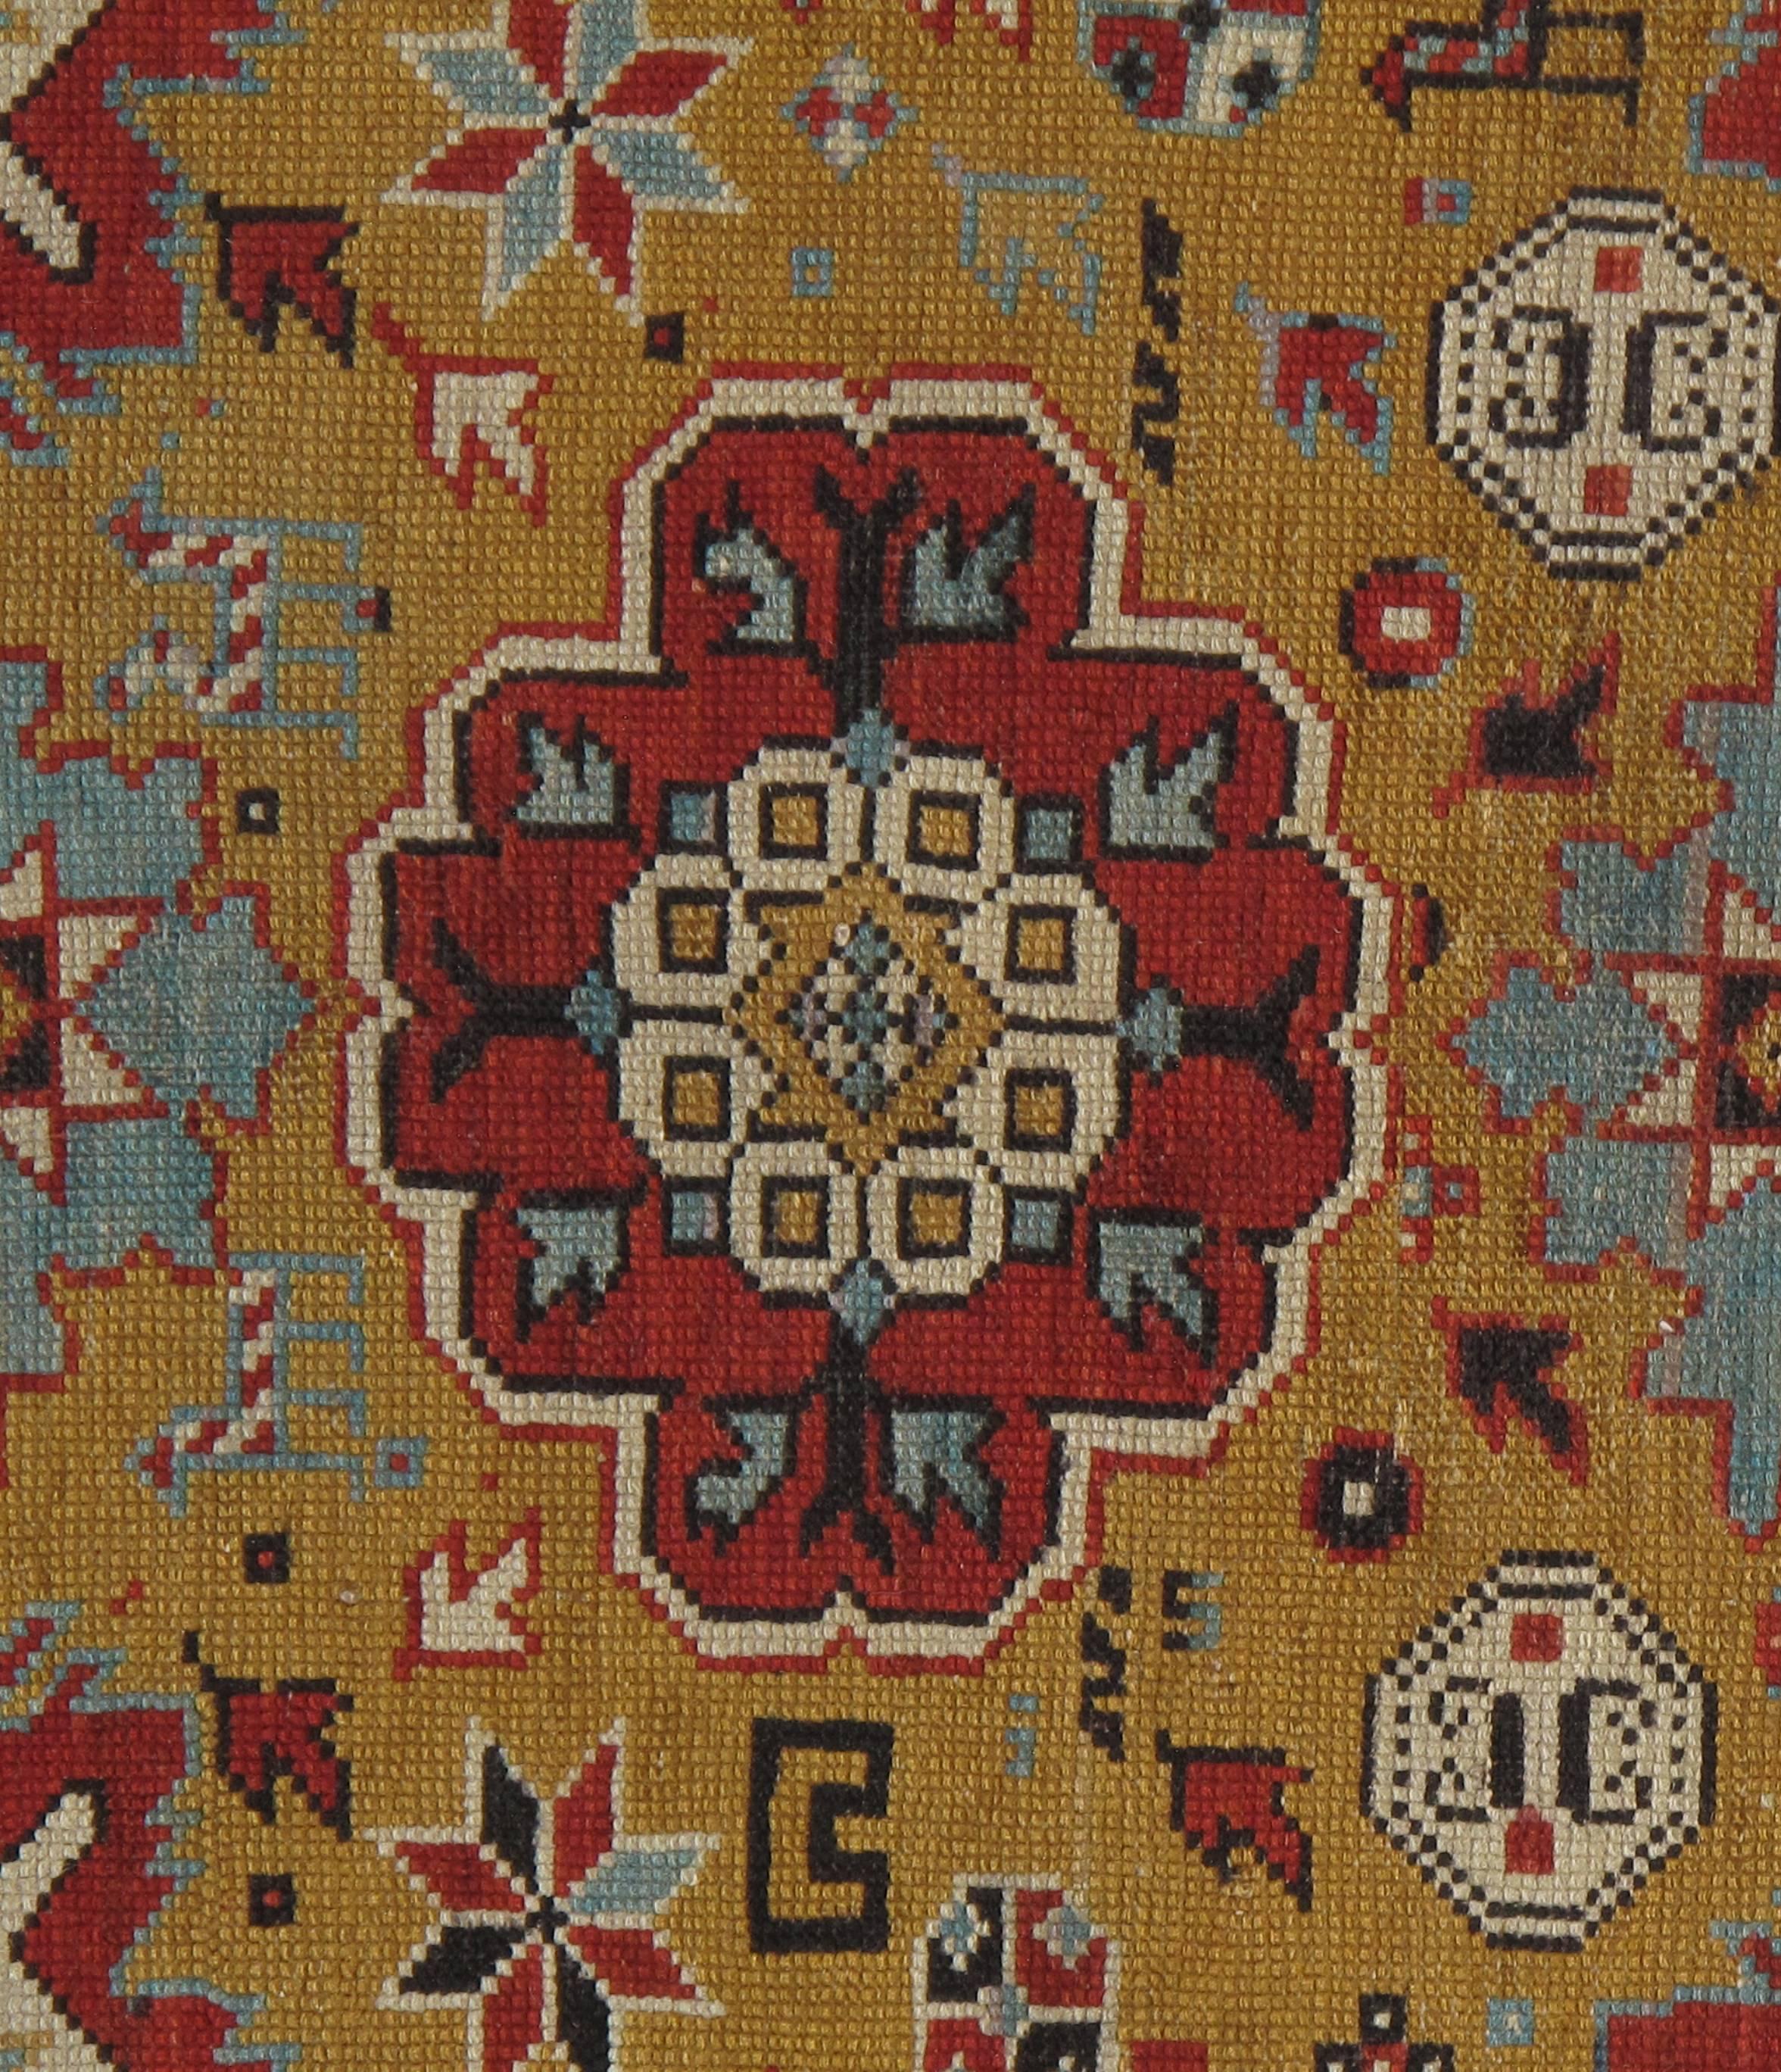 The town of Kuba, like Gendje, was a collection point for rugs from the eponymous mountainous region, due to its location on the Baku-Daghestan road. “Rugs from the Kuba region have intricate designs. They are usually finely knotted, with a closely